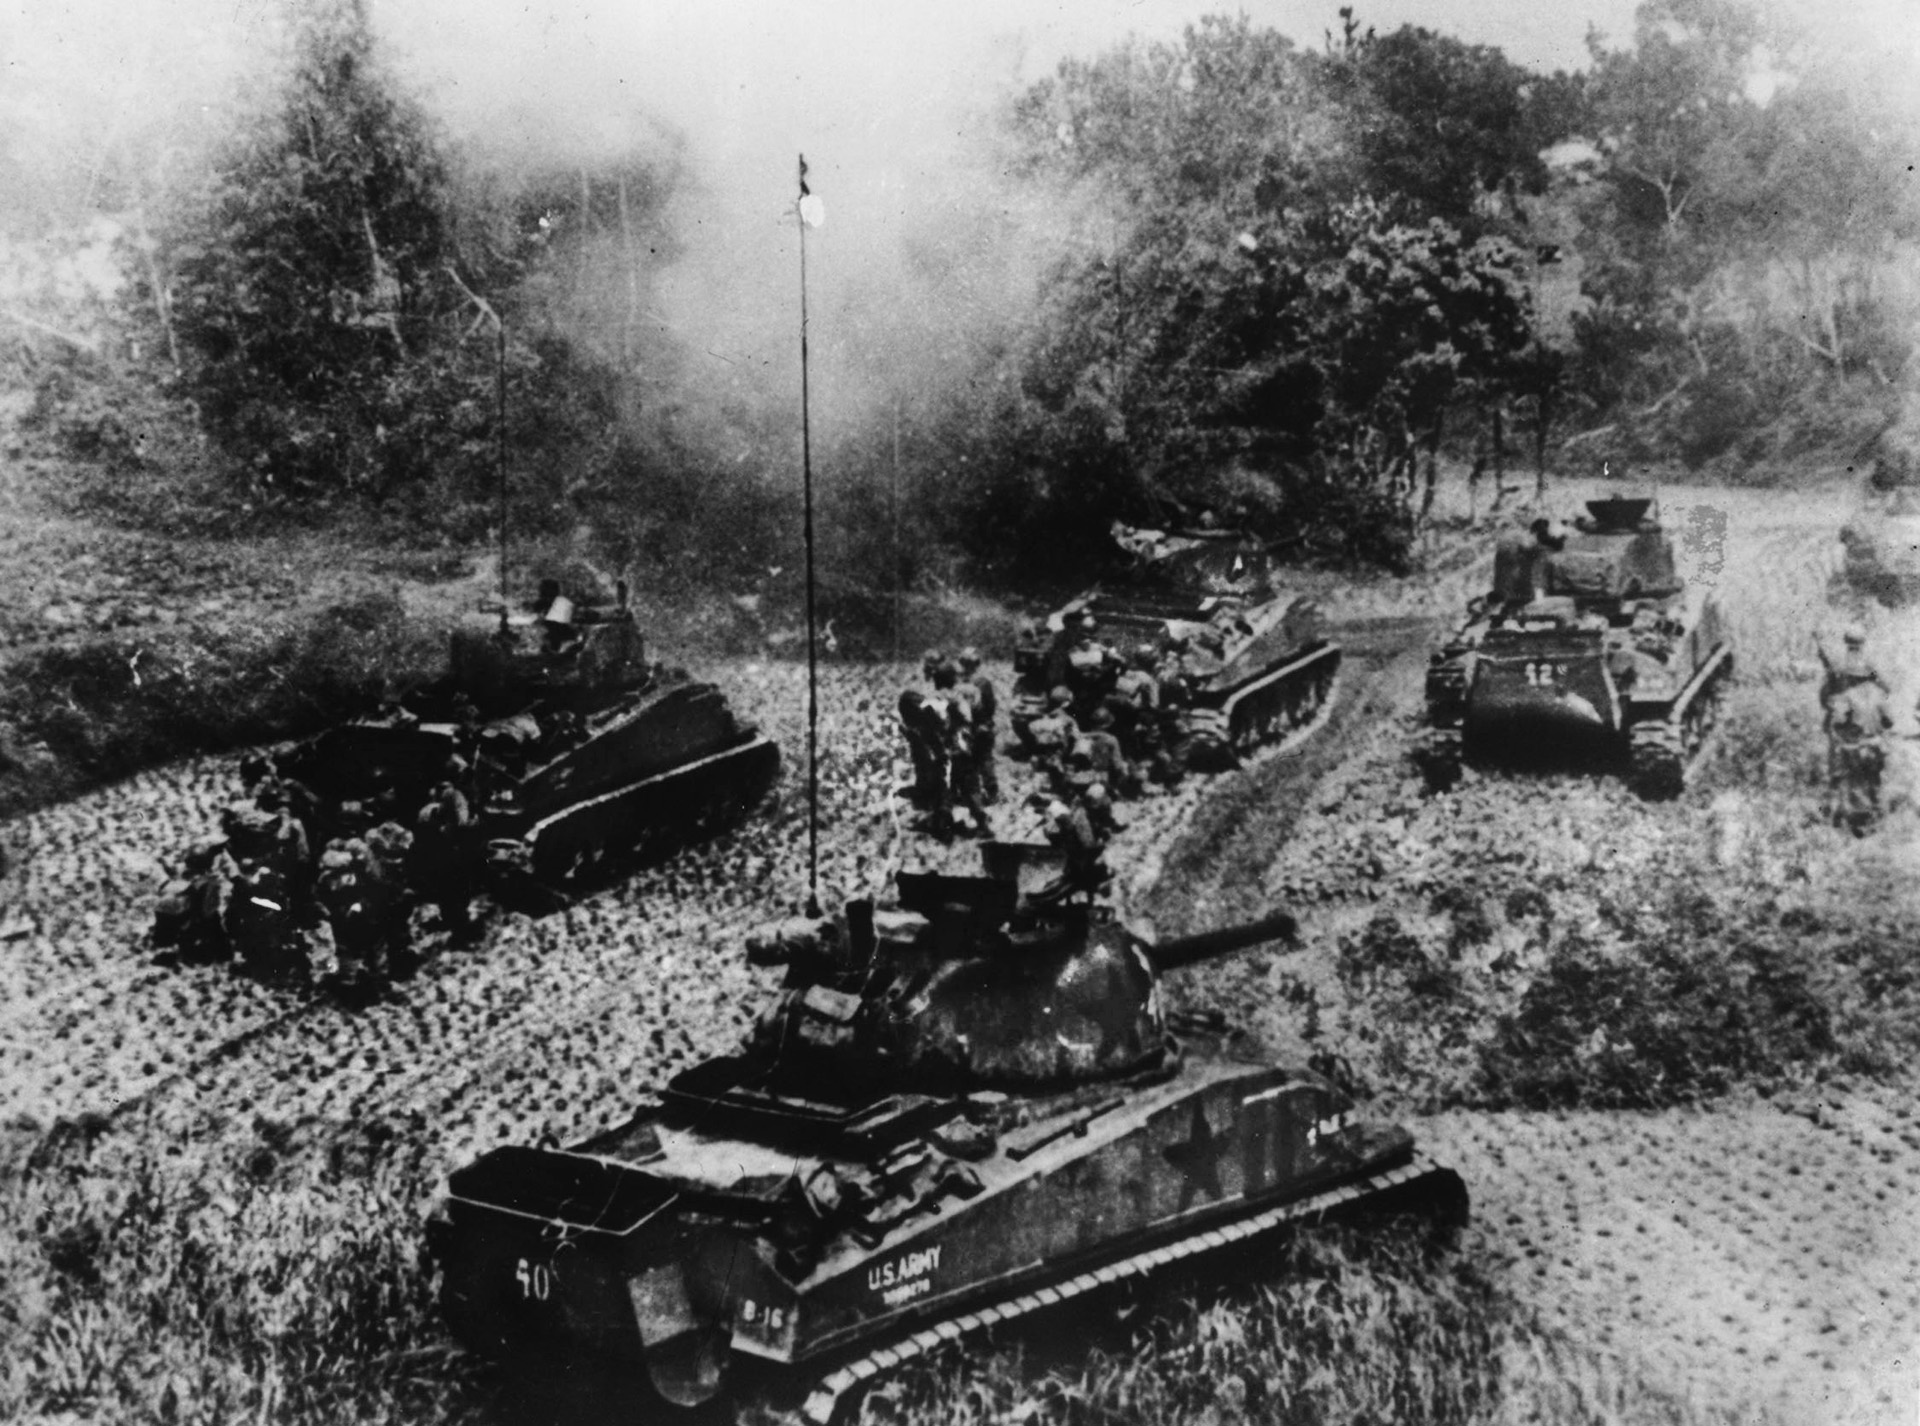 A quartet of American tanks, accompanied by infantrymen, advance against Japanese positions.